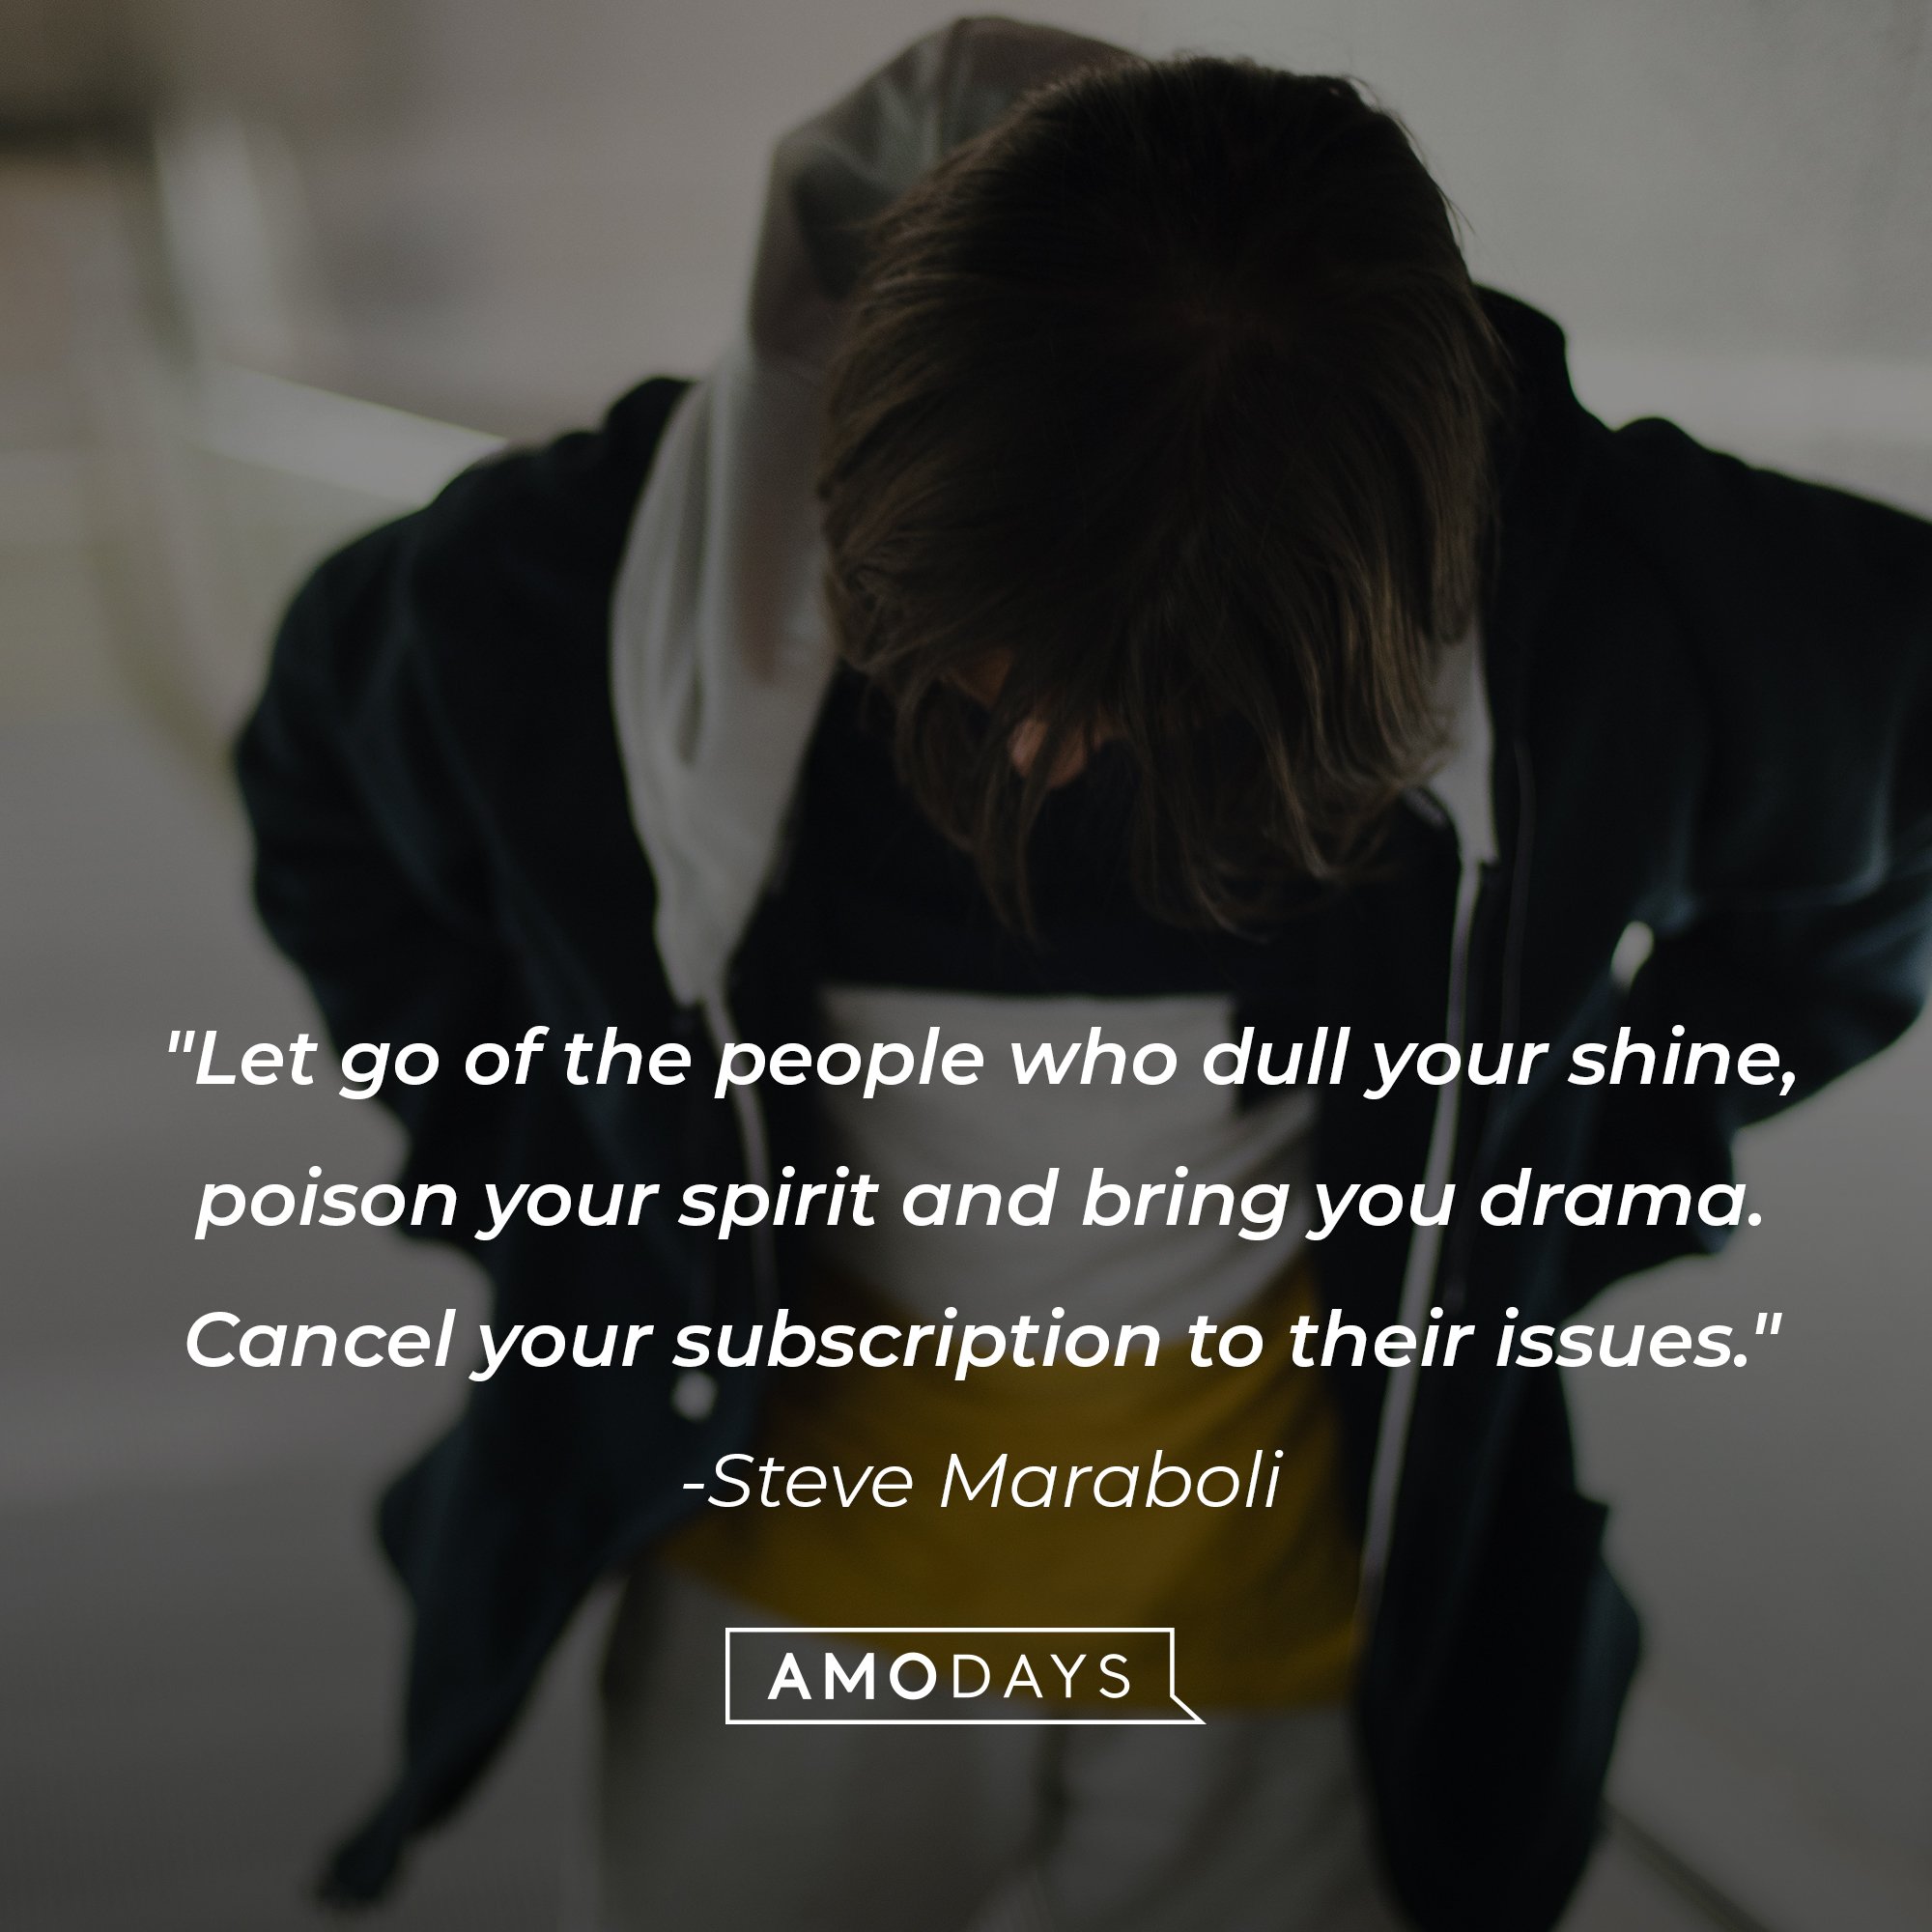 Steve Maraboli’s quote: "Let go of the people who dull your shine, poison your spirit and bring you drama. Cancel your subscription to their issues." | Image: AmoDays 